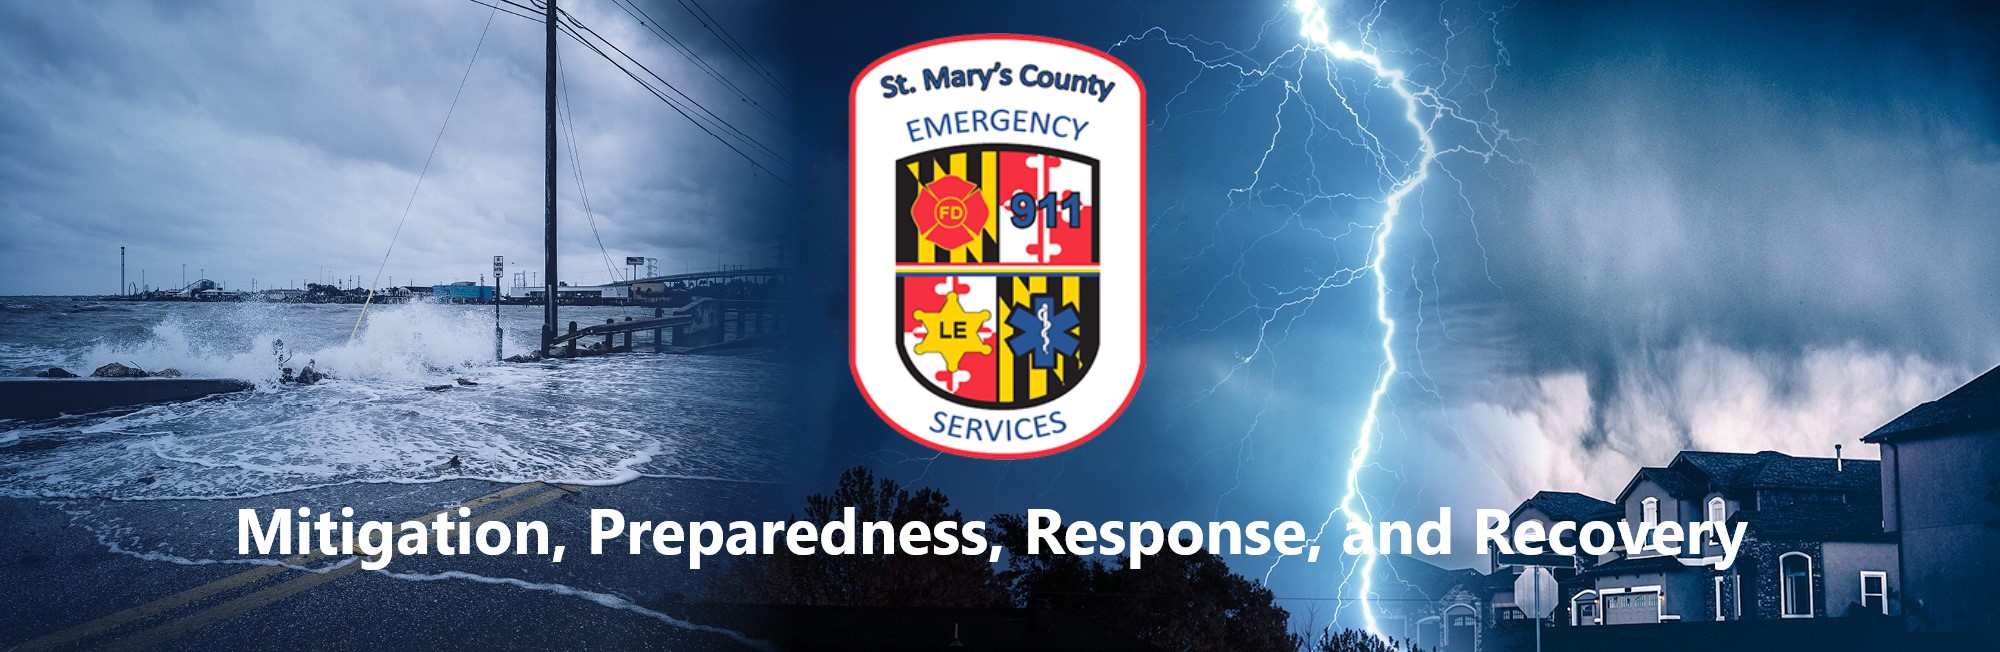 The St. Mary's County Emergency Services logo sits on top of photos of a number of natural distasters. Text below reads 'Mitigation, Preparedness, Response, and Recovery'.